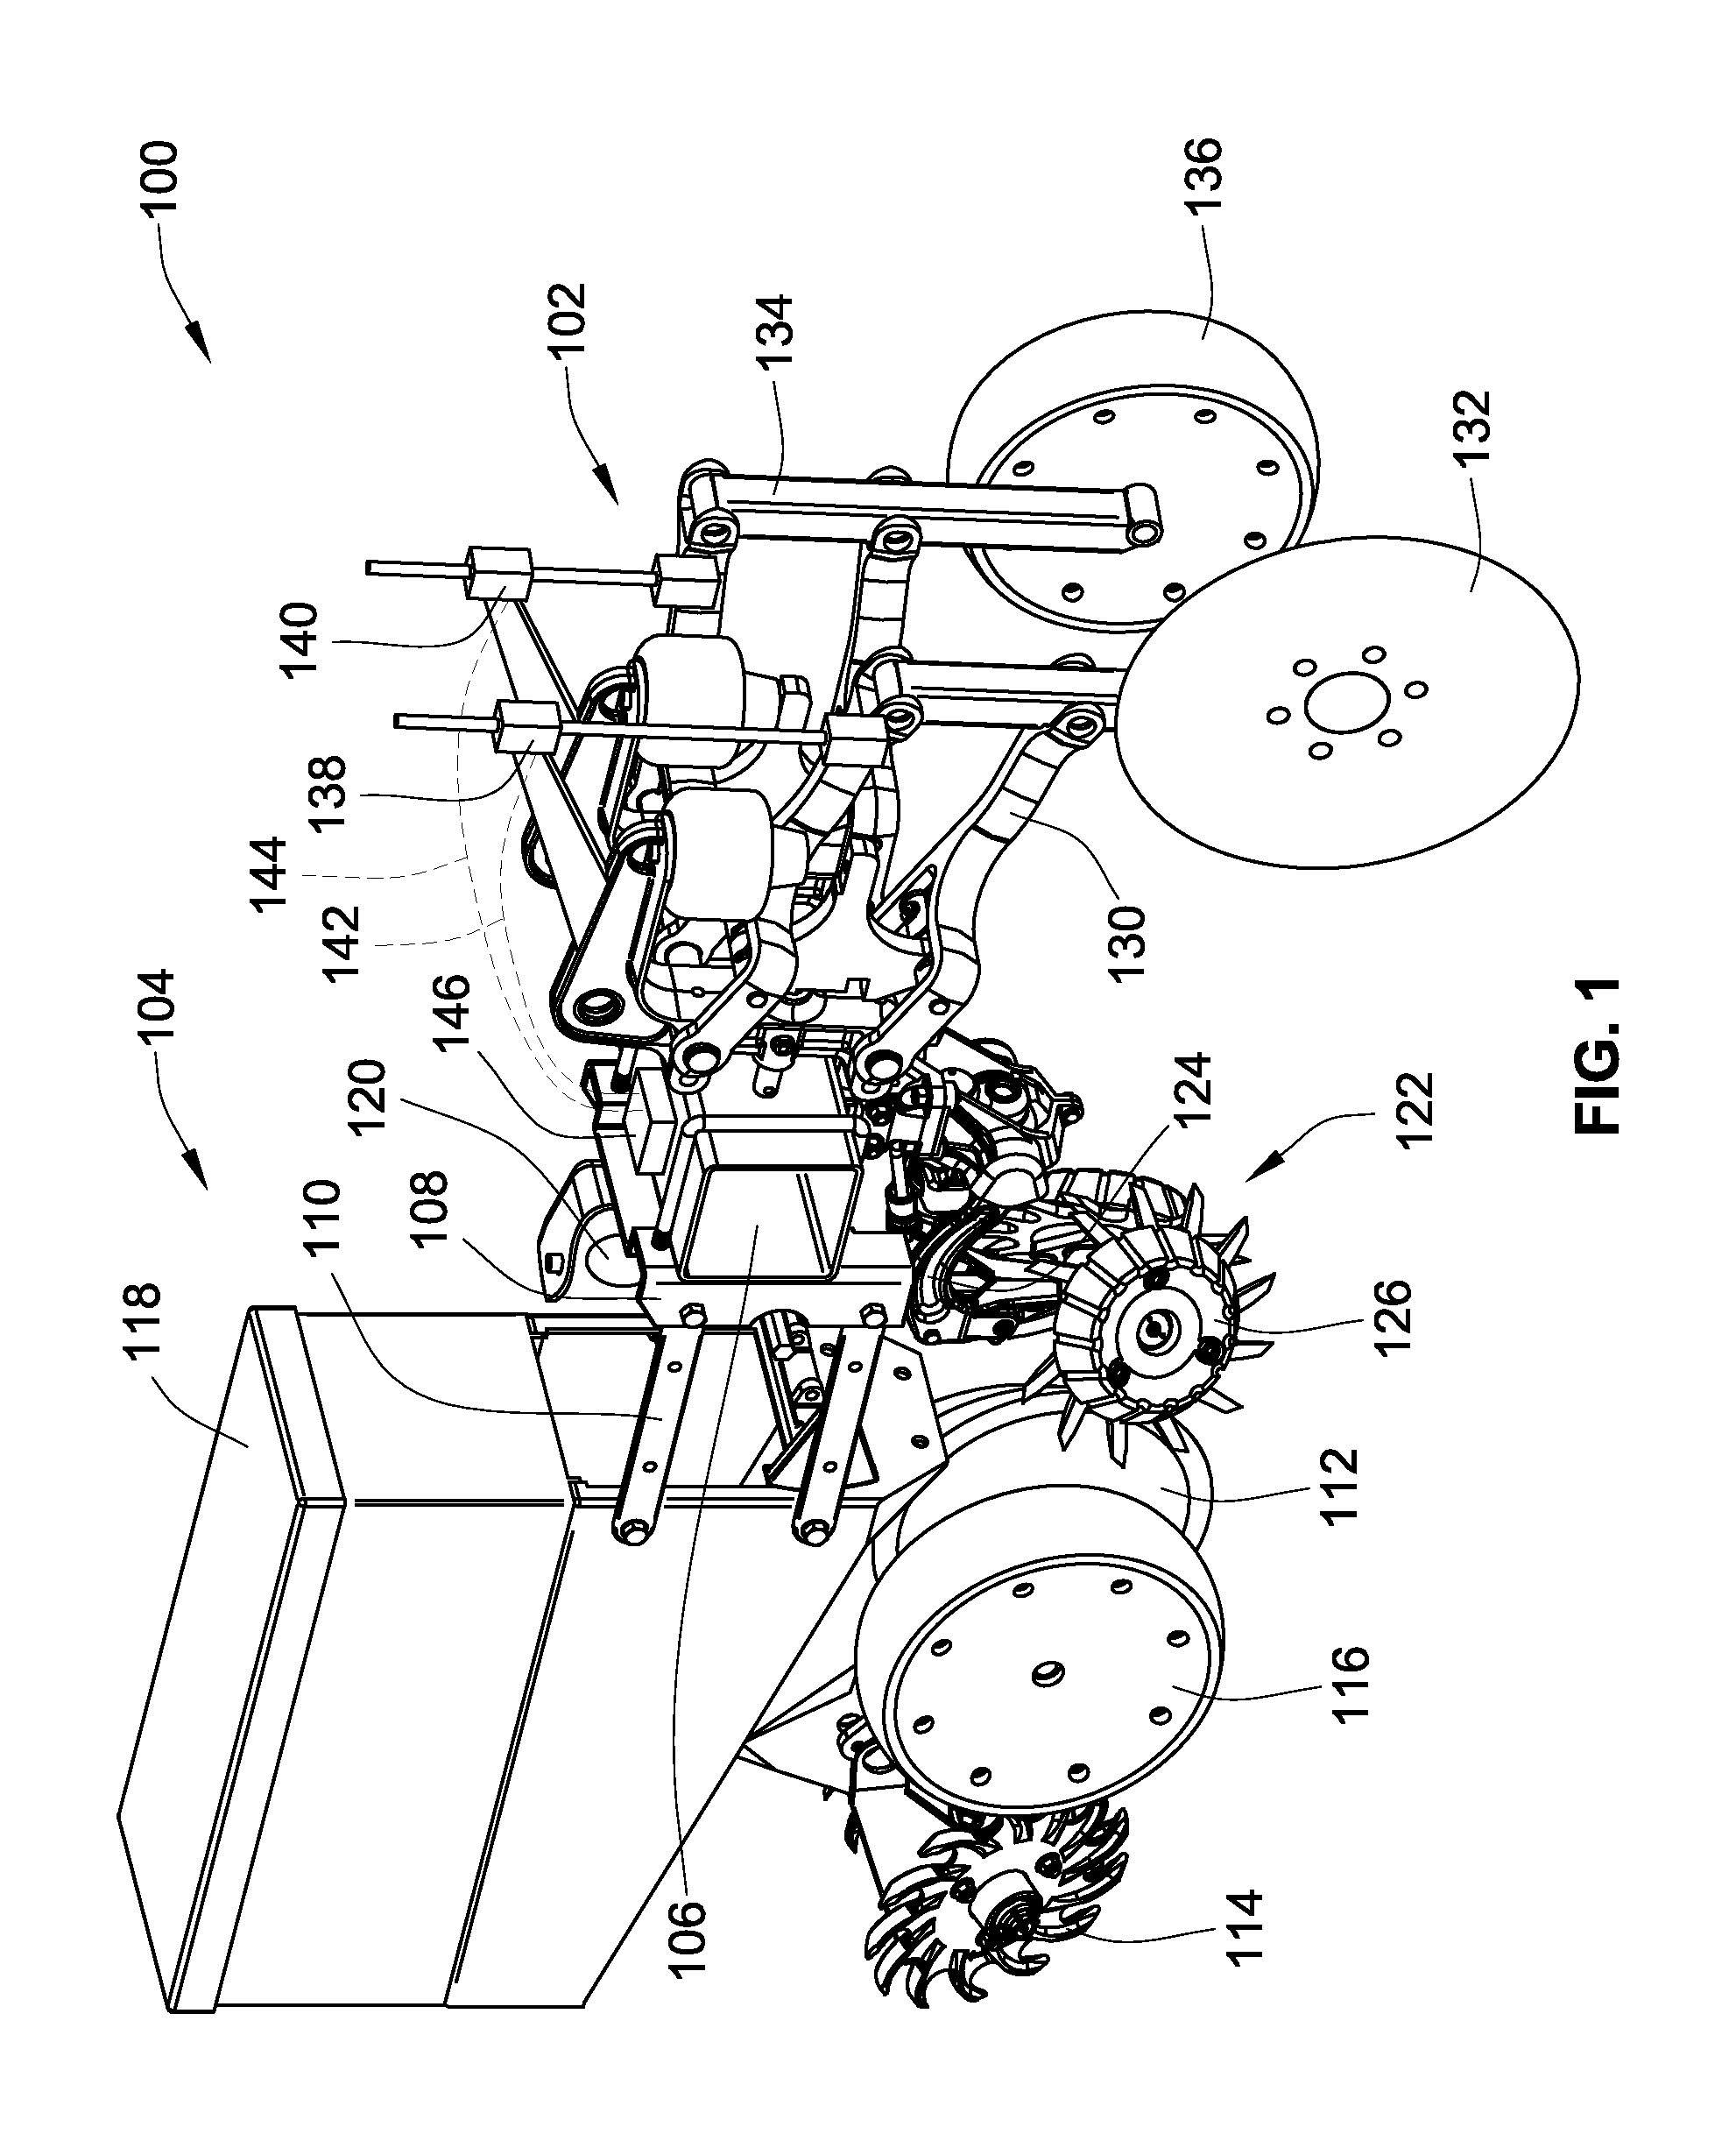 Agricultural apparatus for sensing and providing feedback of soil property changes in real time